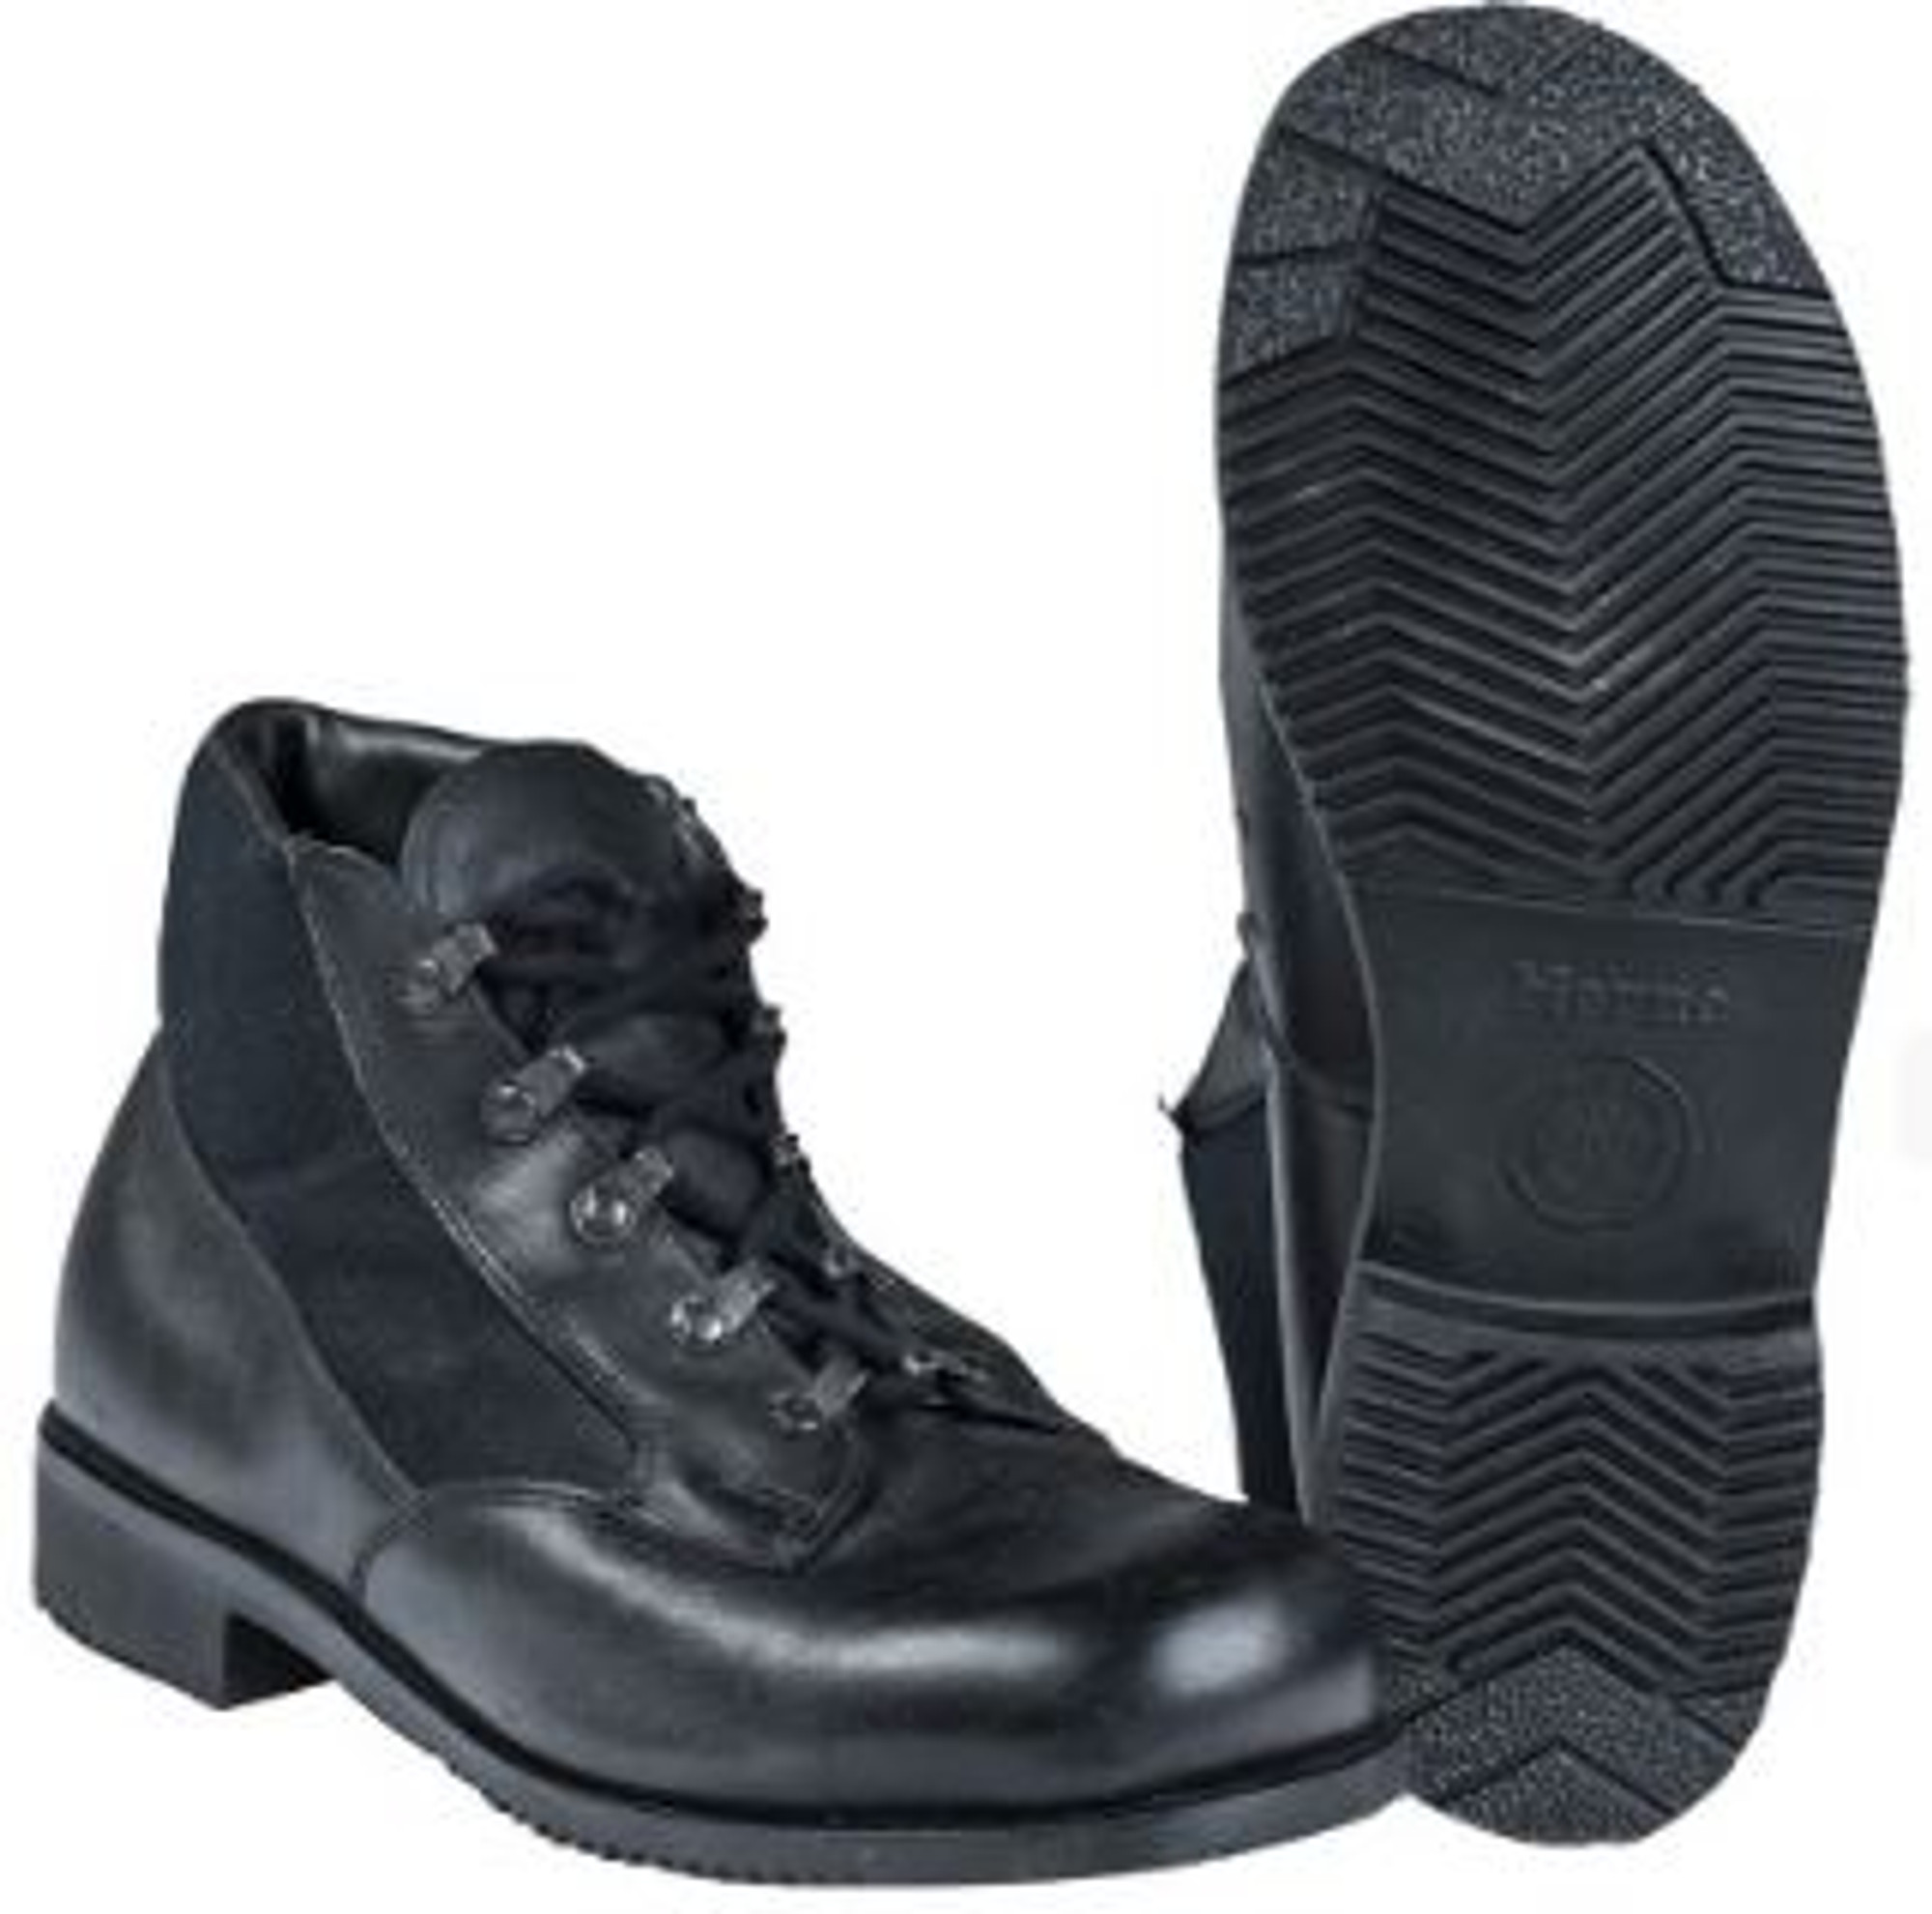 German Armed Forces Navy Deck Shoes